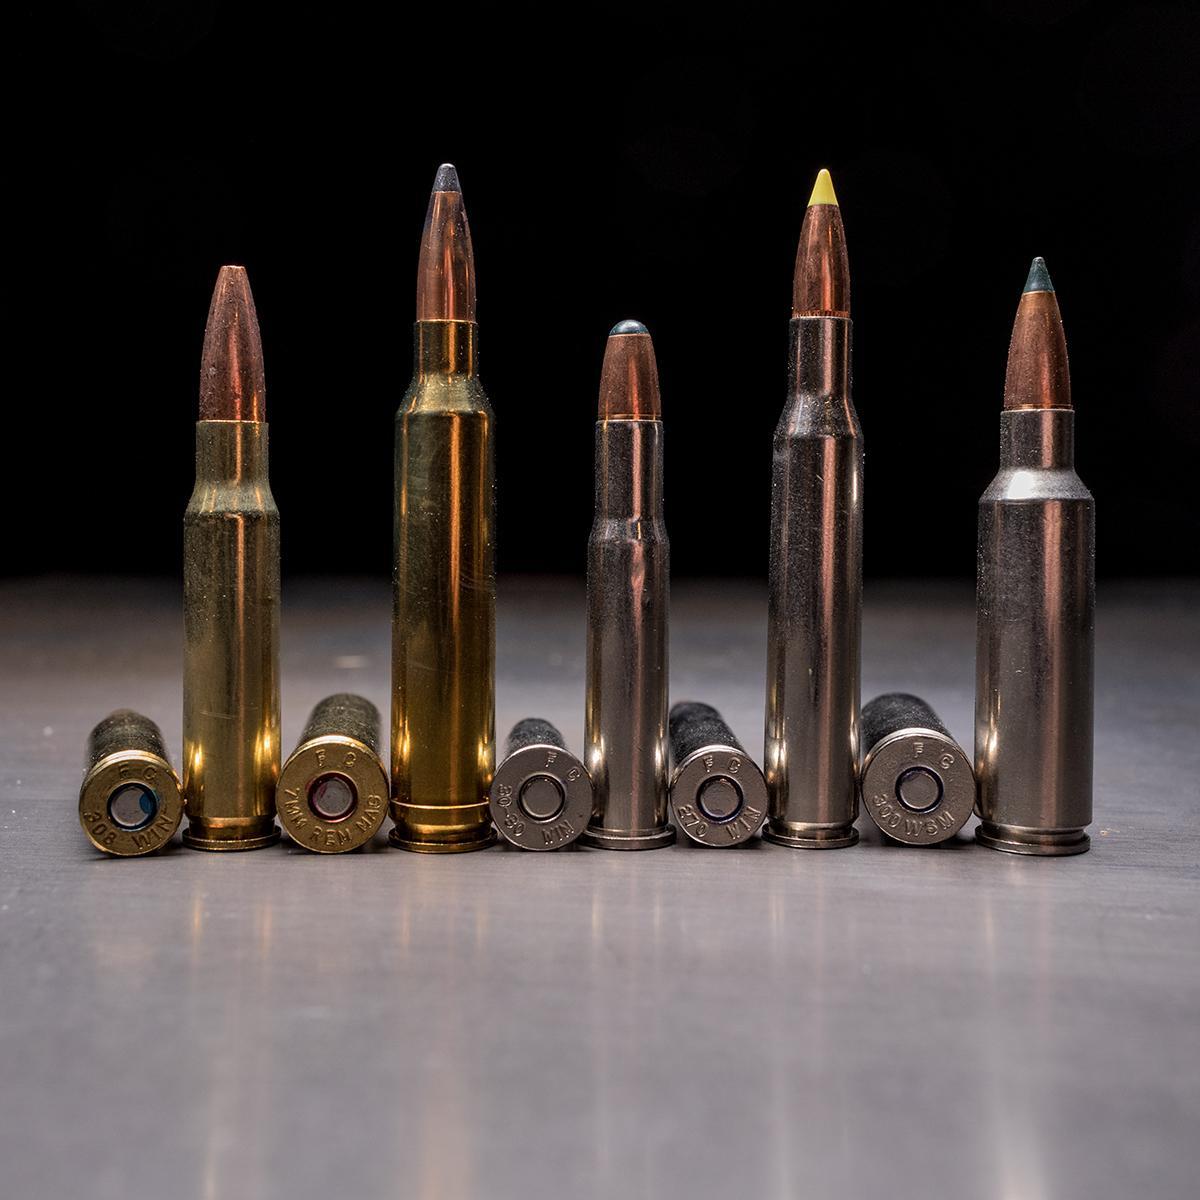 Answer (from left to right): 308 Win, 7mm Rem Mag, 30-30 Win, 270 Win, 300 ...